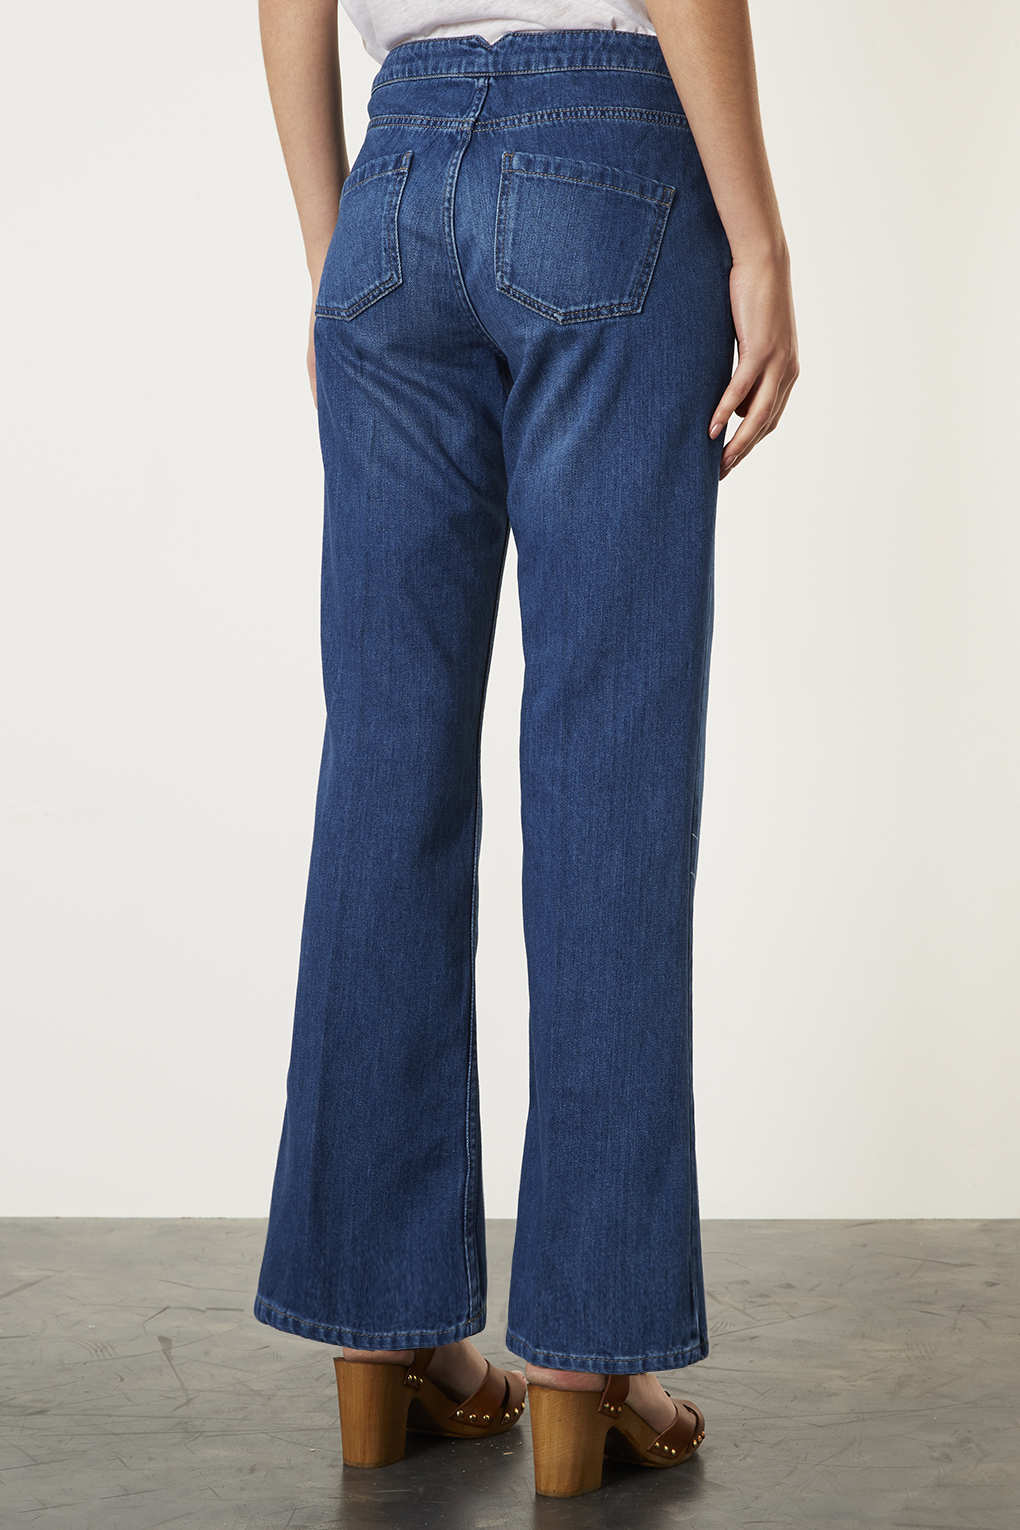 TOPSHOP Moto Vintage Slim Flare Jeans in Mid Stone (Blue) - Lyst